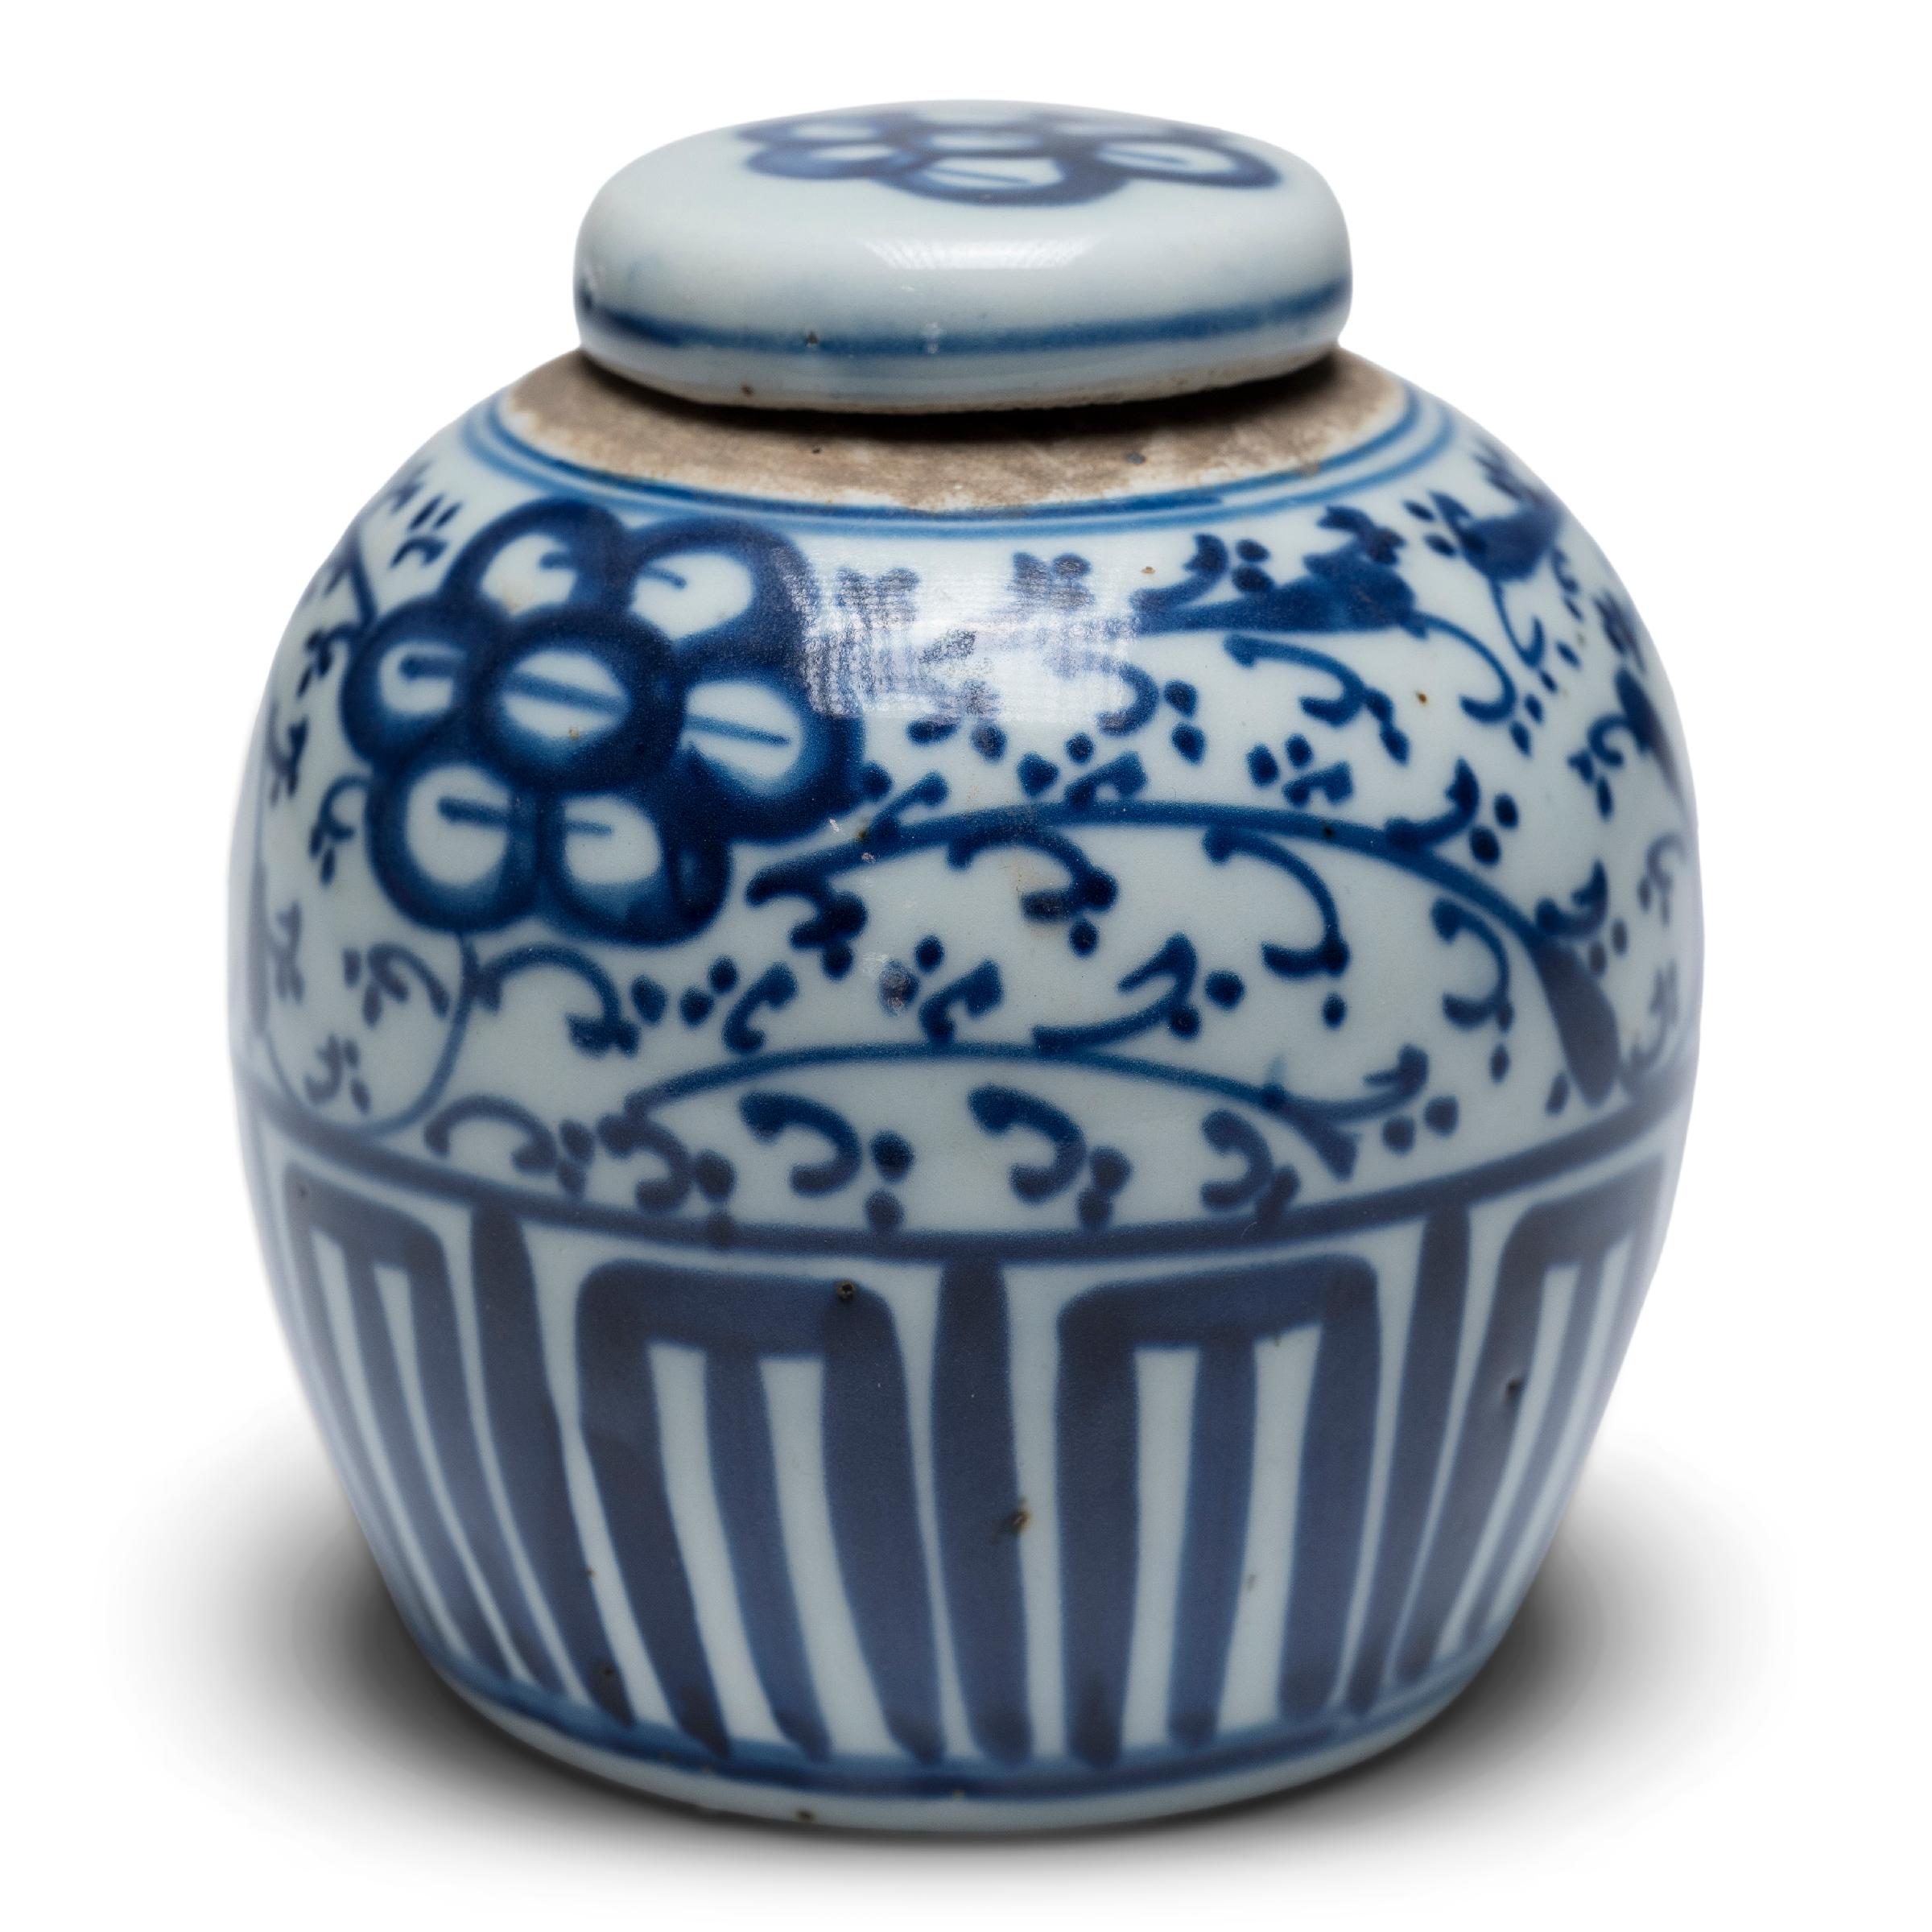 Chinese Export Chinese Petite Blue & White Floral Jar, c. 1900